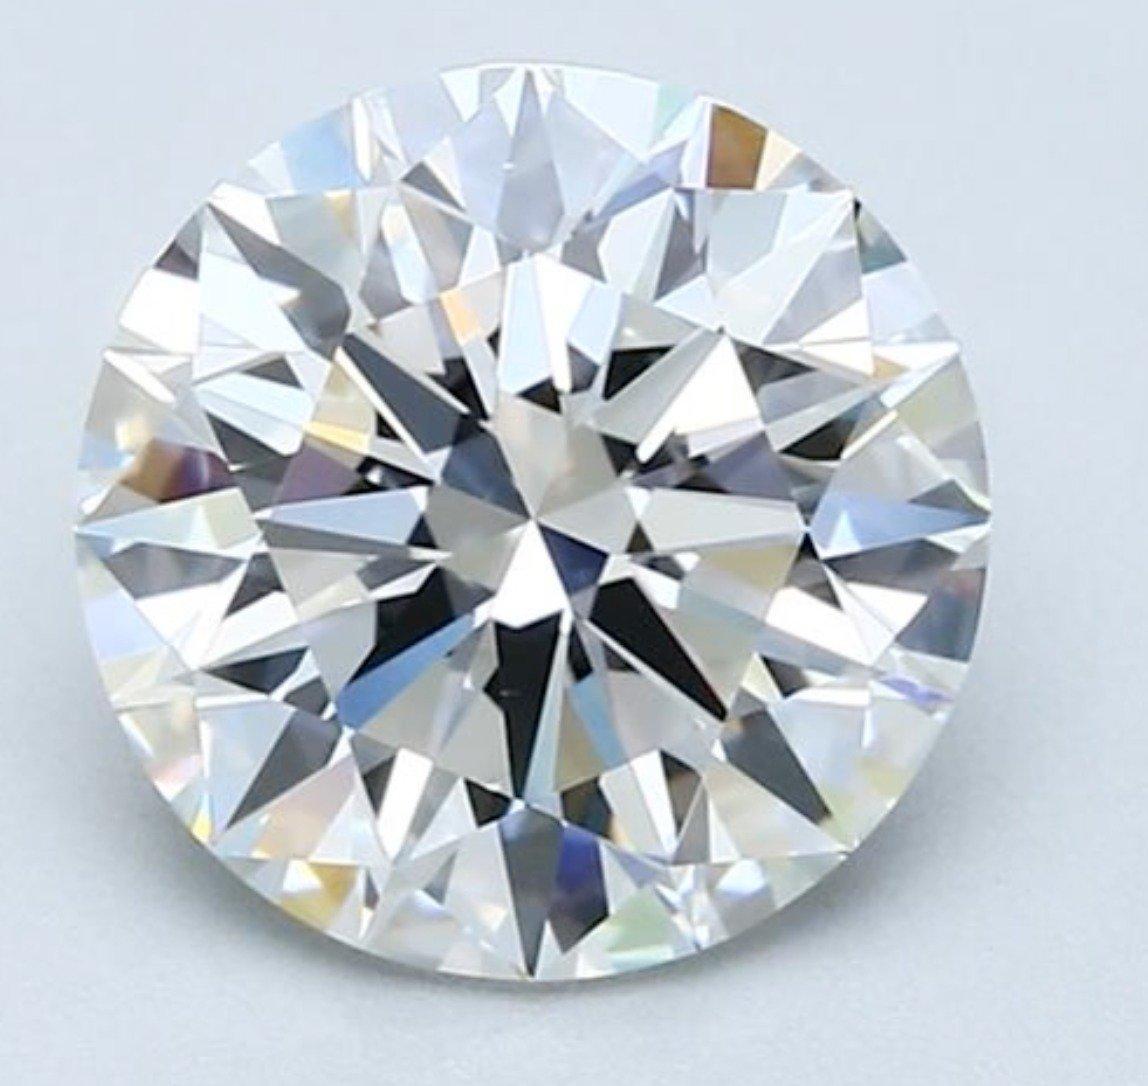 Two natural round brilliant diamond in a 0.82 total carats G VS2 with beautiful cut and shine. These diamonds comes with an GIA Certificate and laser inscription number.

SKU: DSPV-166661-37 & DSPV-166661-1

GIA 2136716494 & 1139666418

